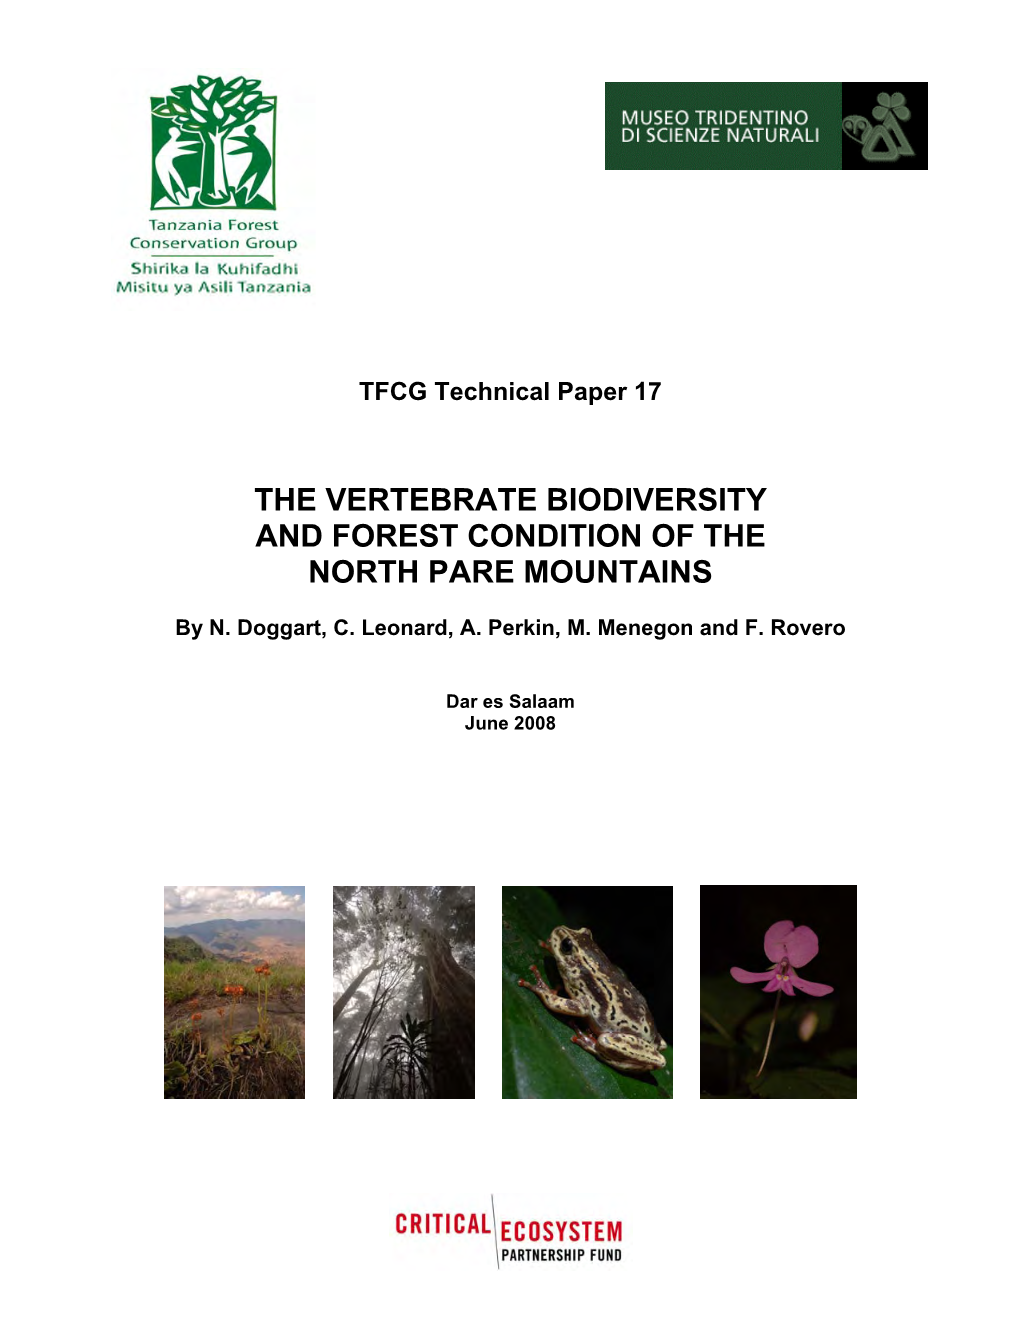 The Vertebrate Biodiversity and Forest Condition of the North Pare Mountains